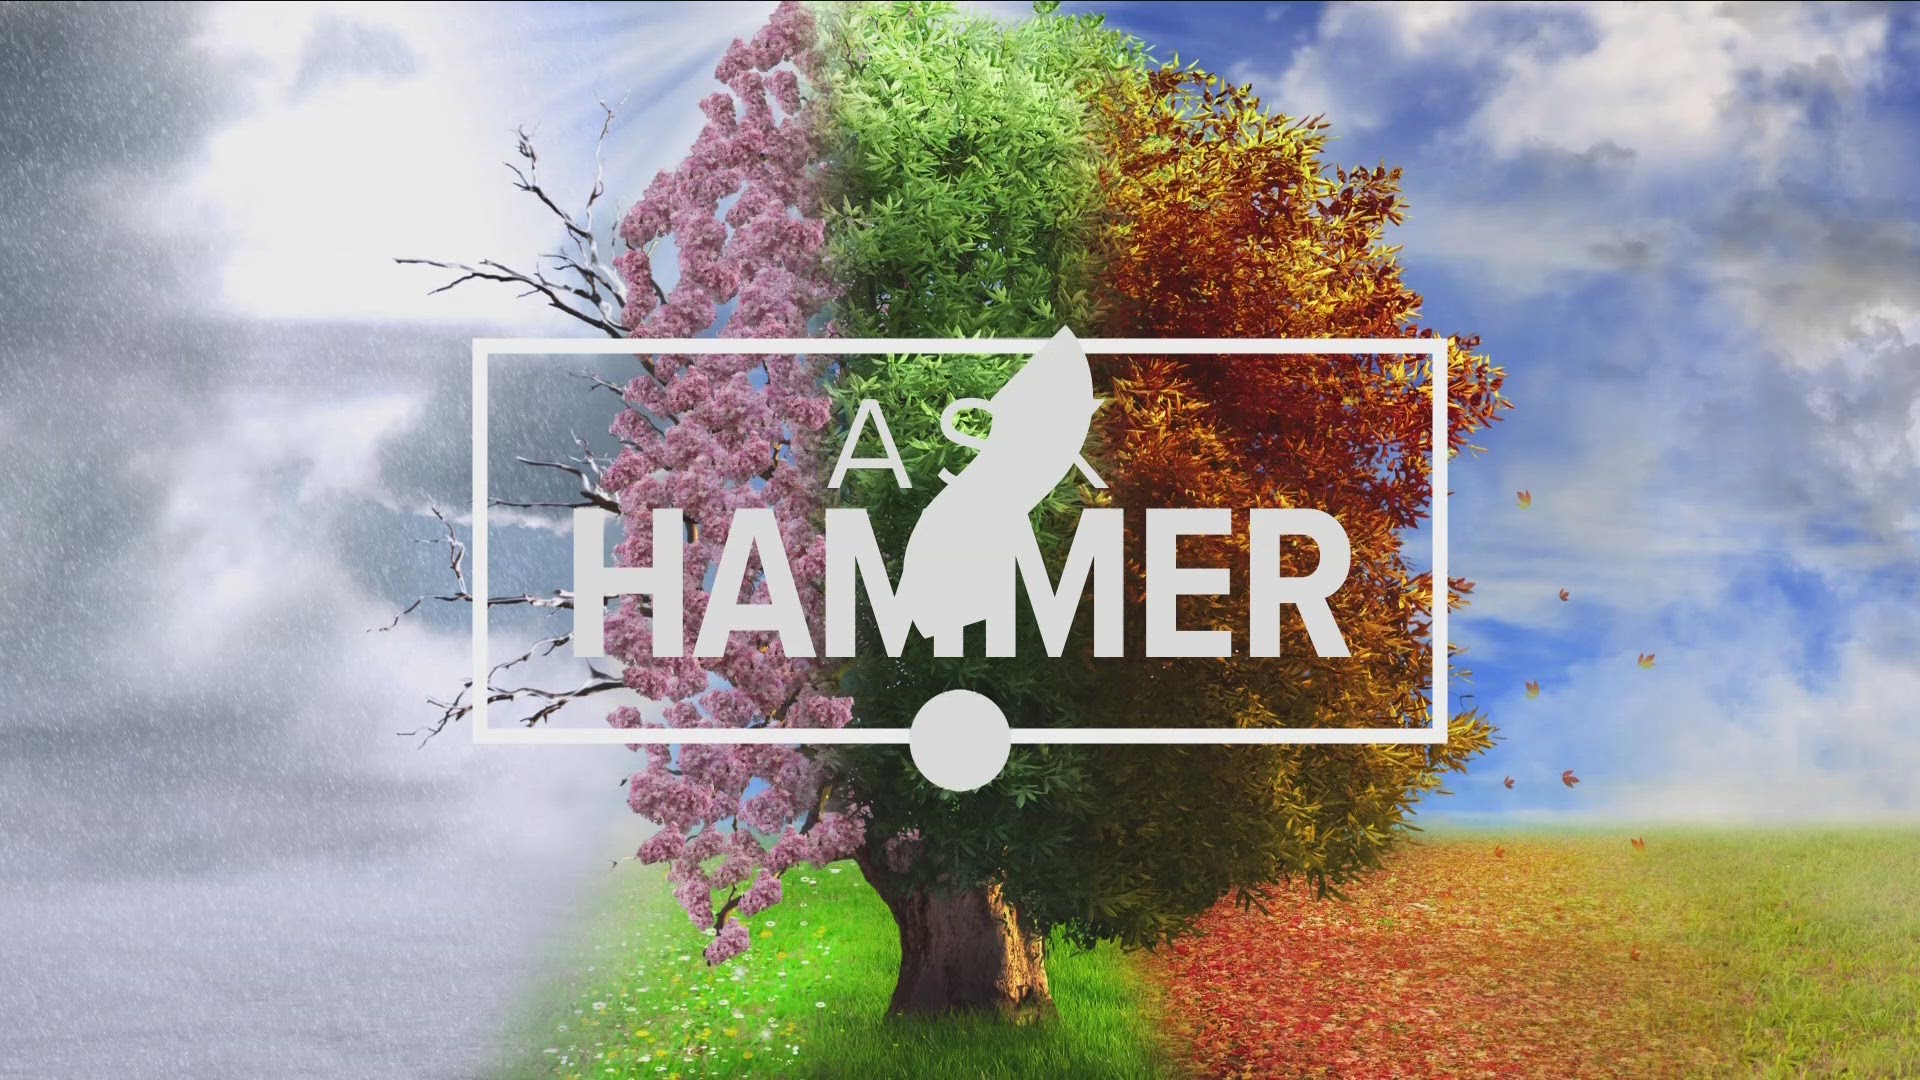 Severe weather is on the way and today we're turning to an expert with questions you may have "Ask Hammer" is Storm Team 2's Chief Meteorologist Patrick Hammer